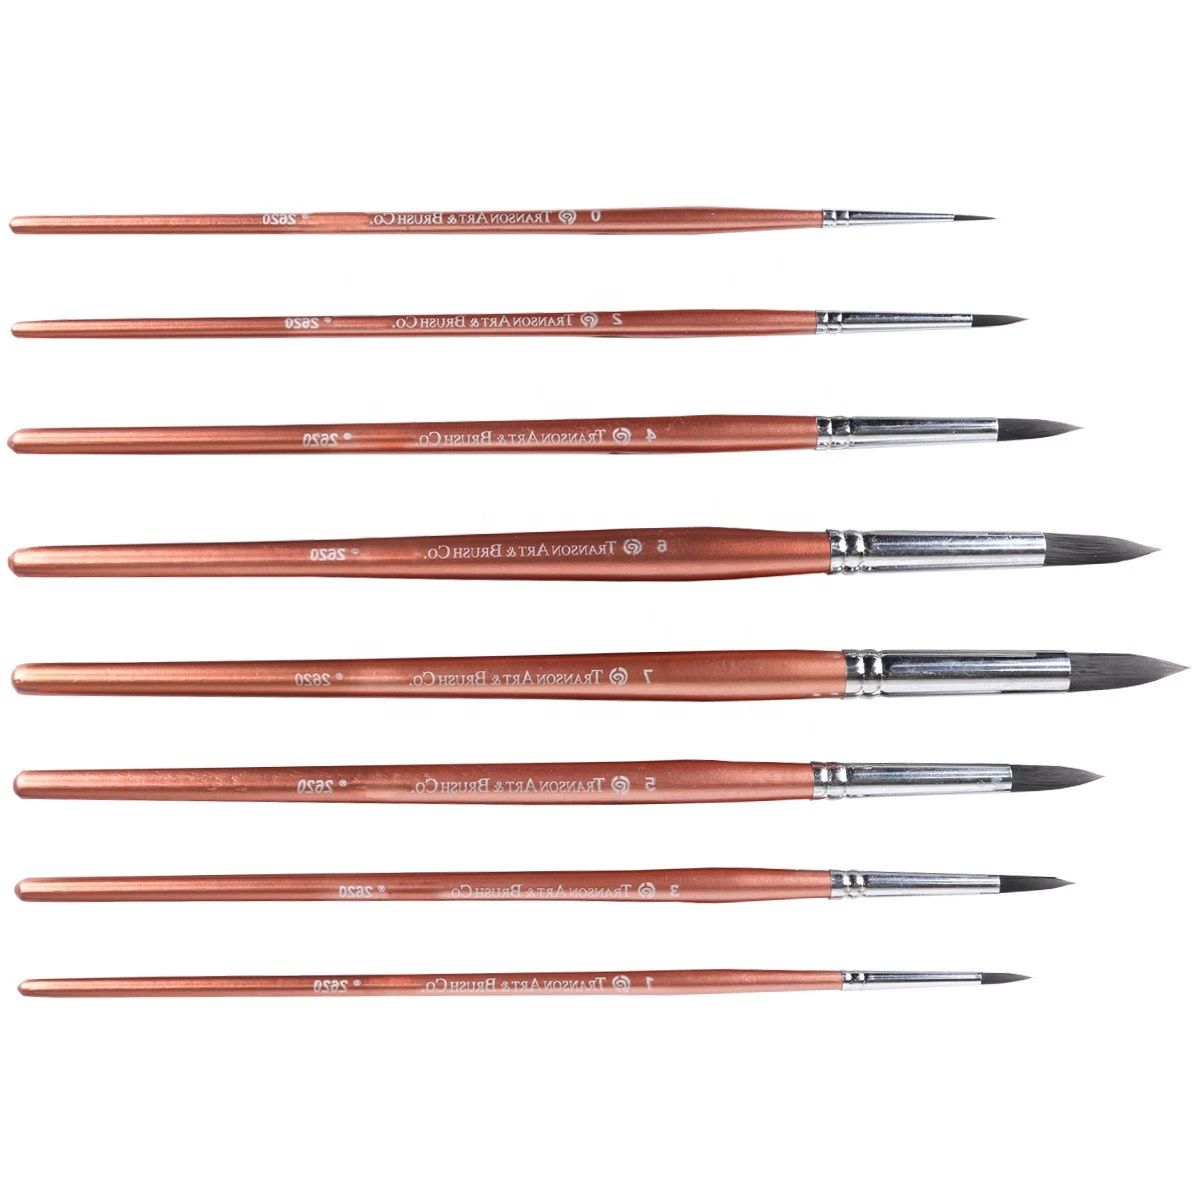 8 pcs round paint brush set for Oil and Acrylic Painting,Gouache